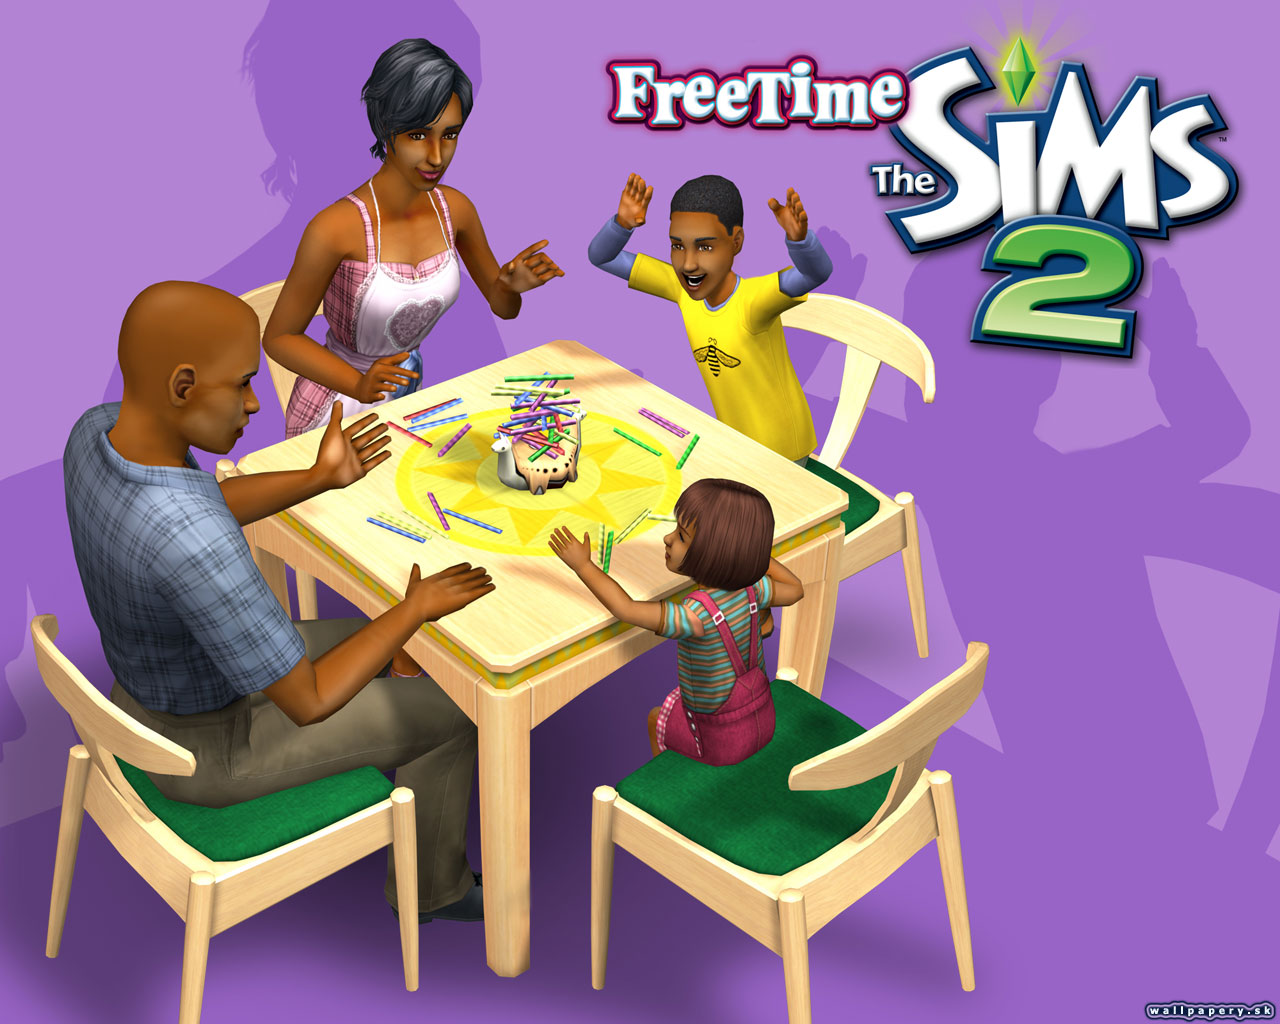 The Sims 2: Free Time - wallpaper 6